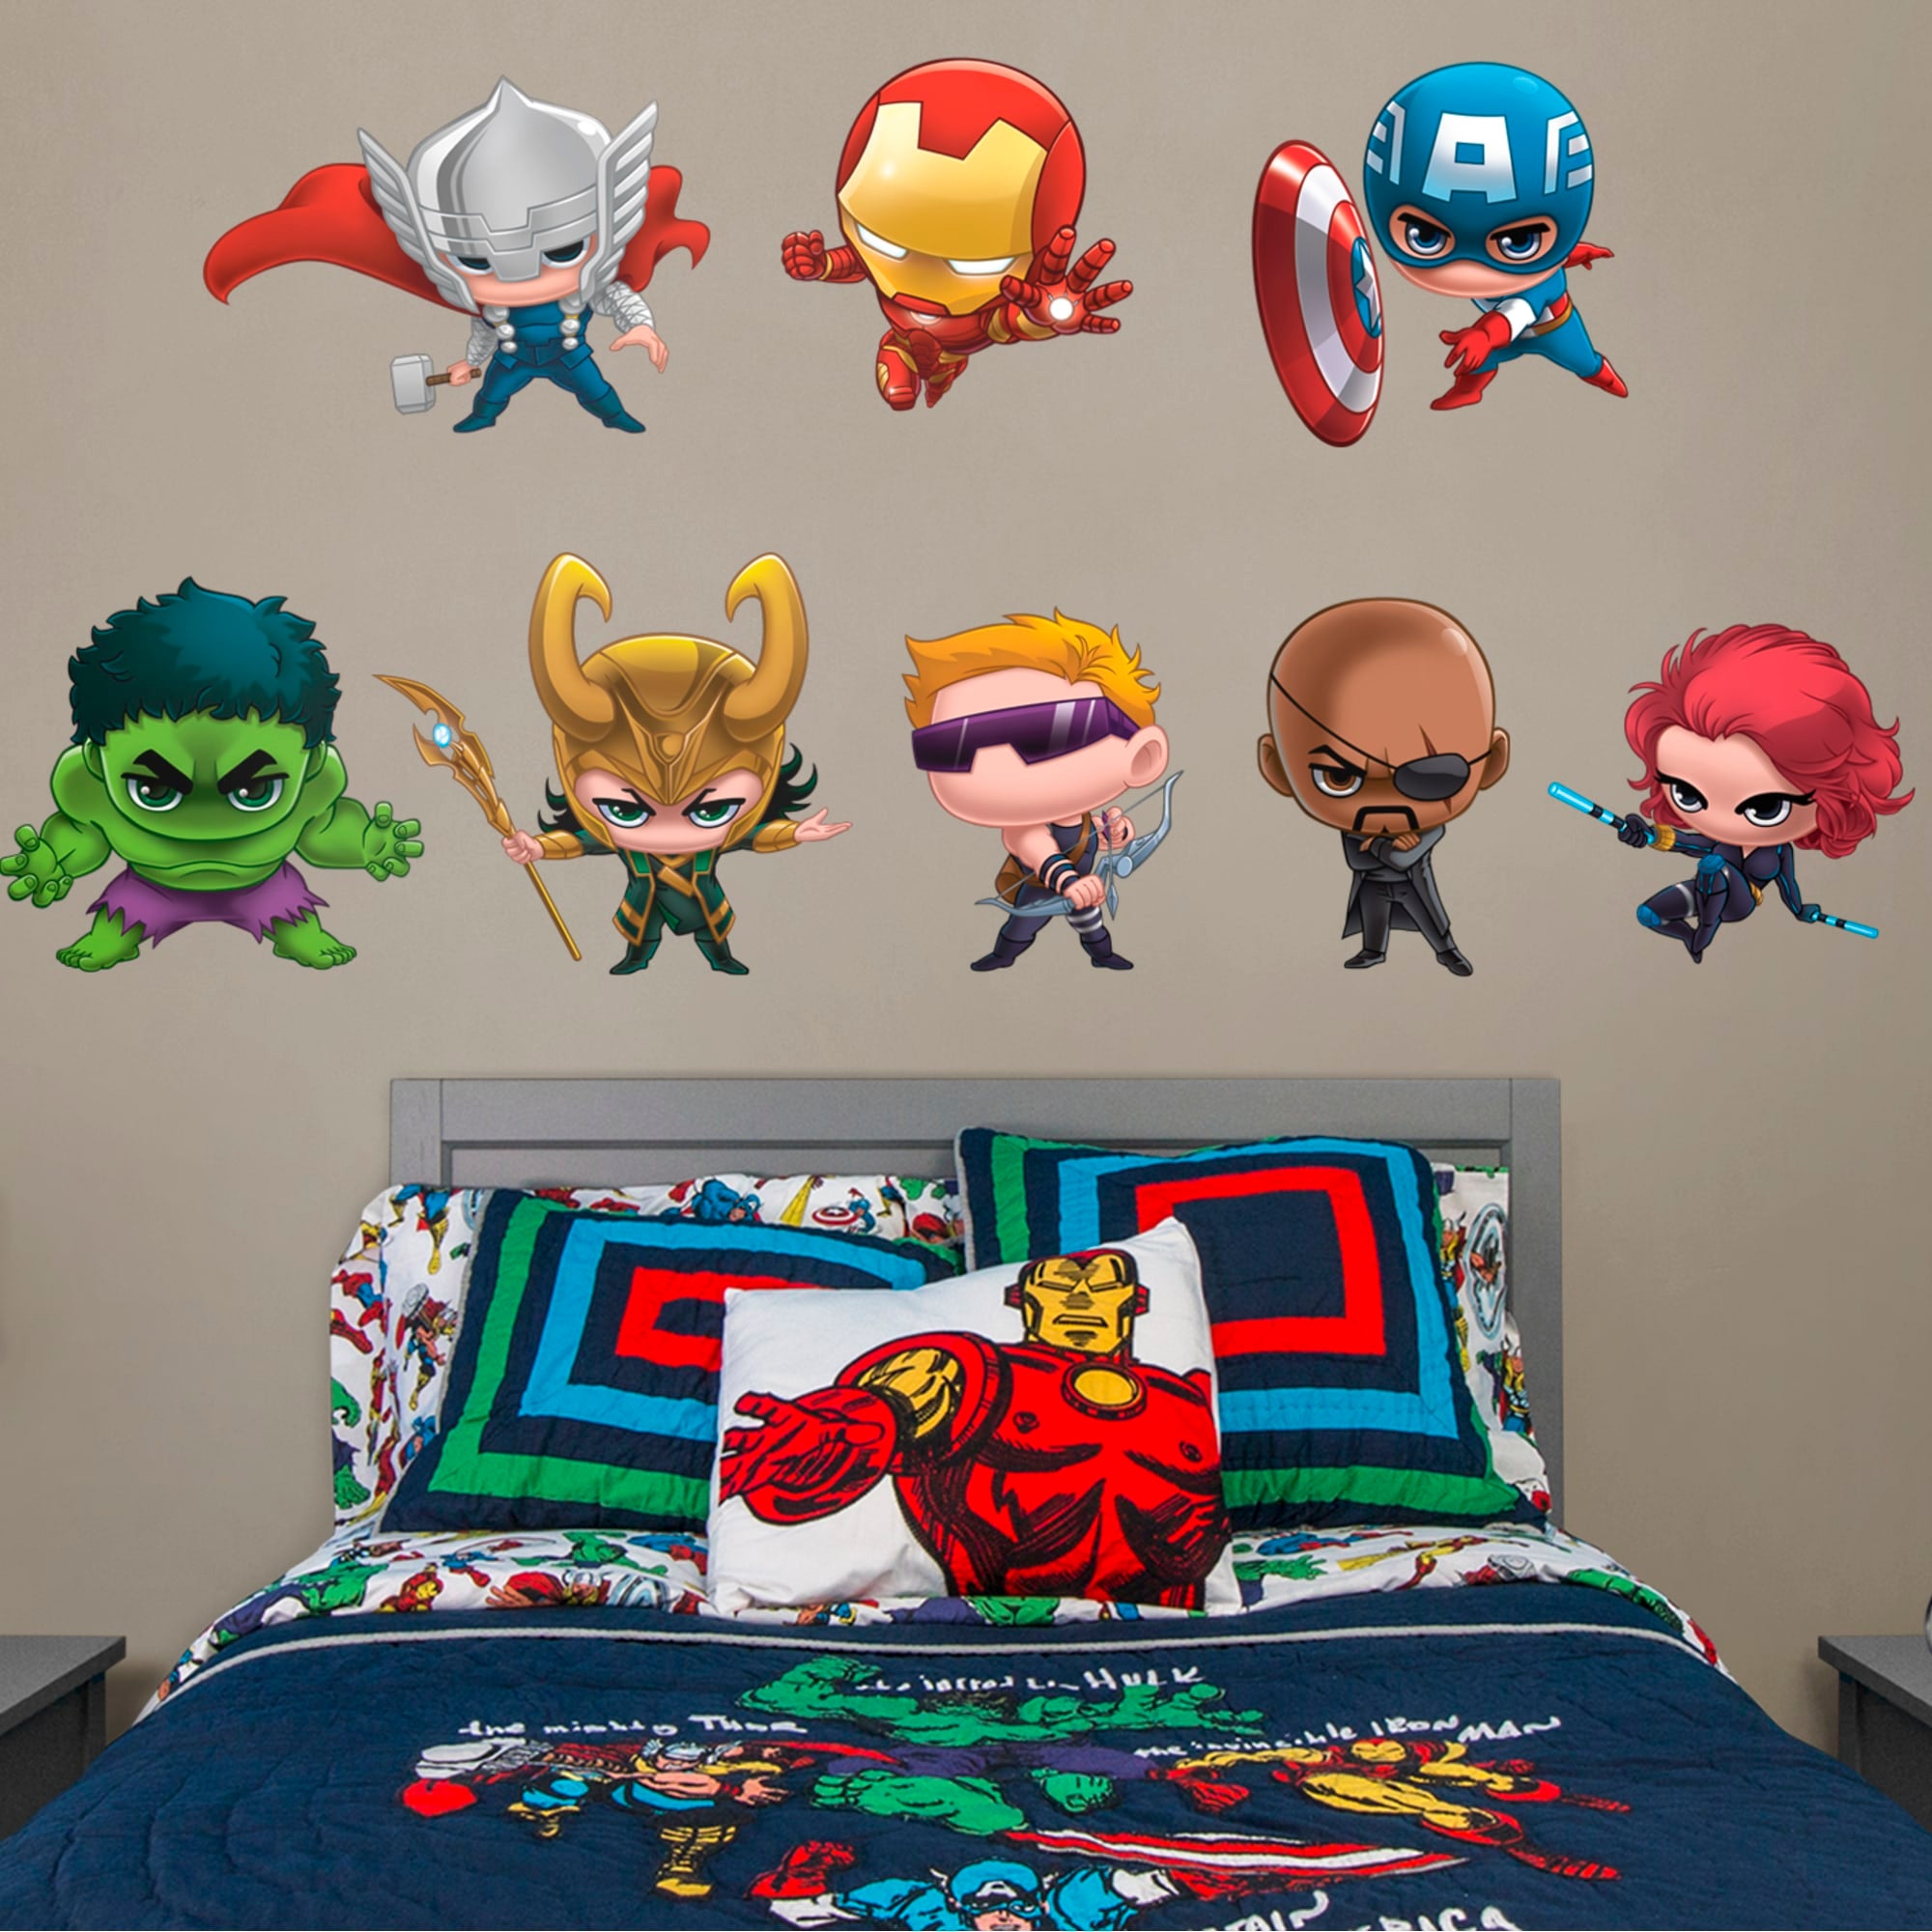 Marvel Team Up Collection - Officially Licensed Removable Wall Decal 80.0"W x 53.0"H by Fathead | Vinyl